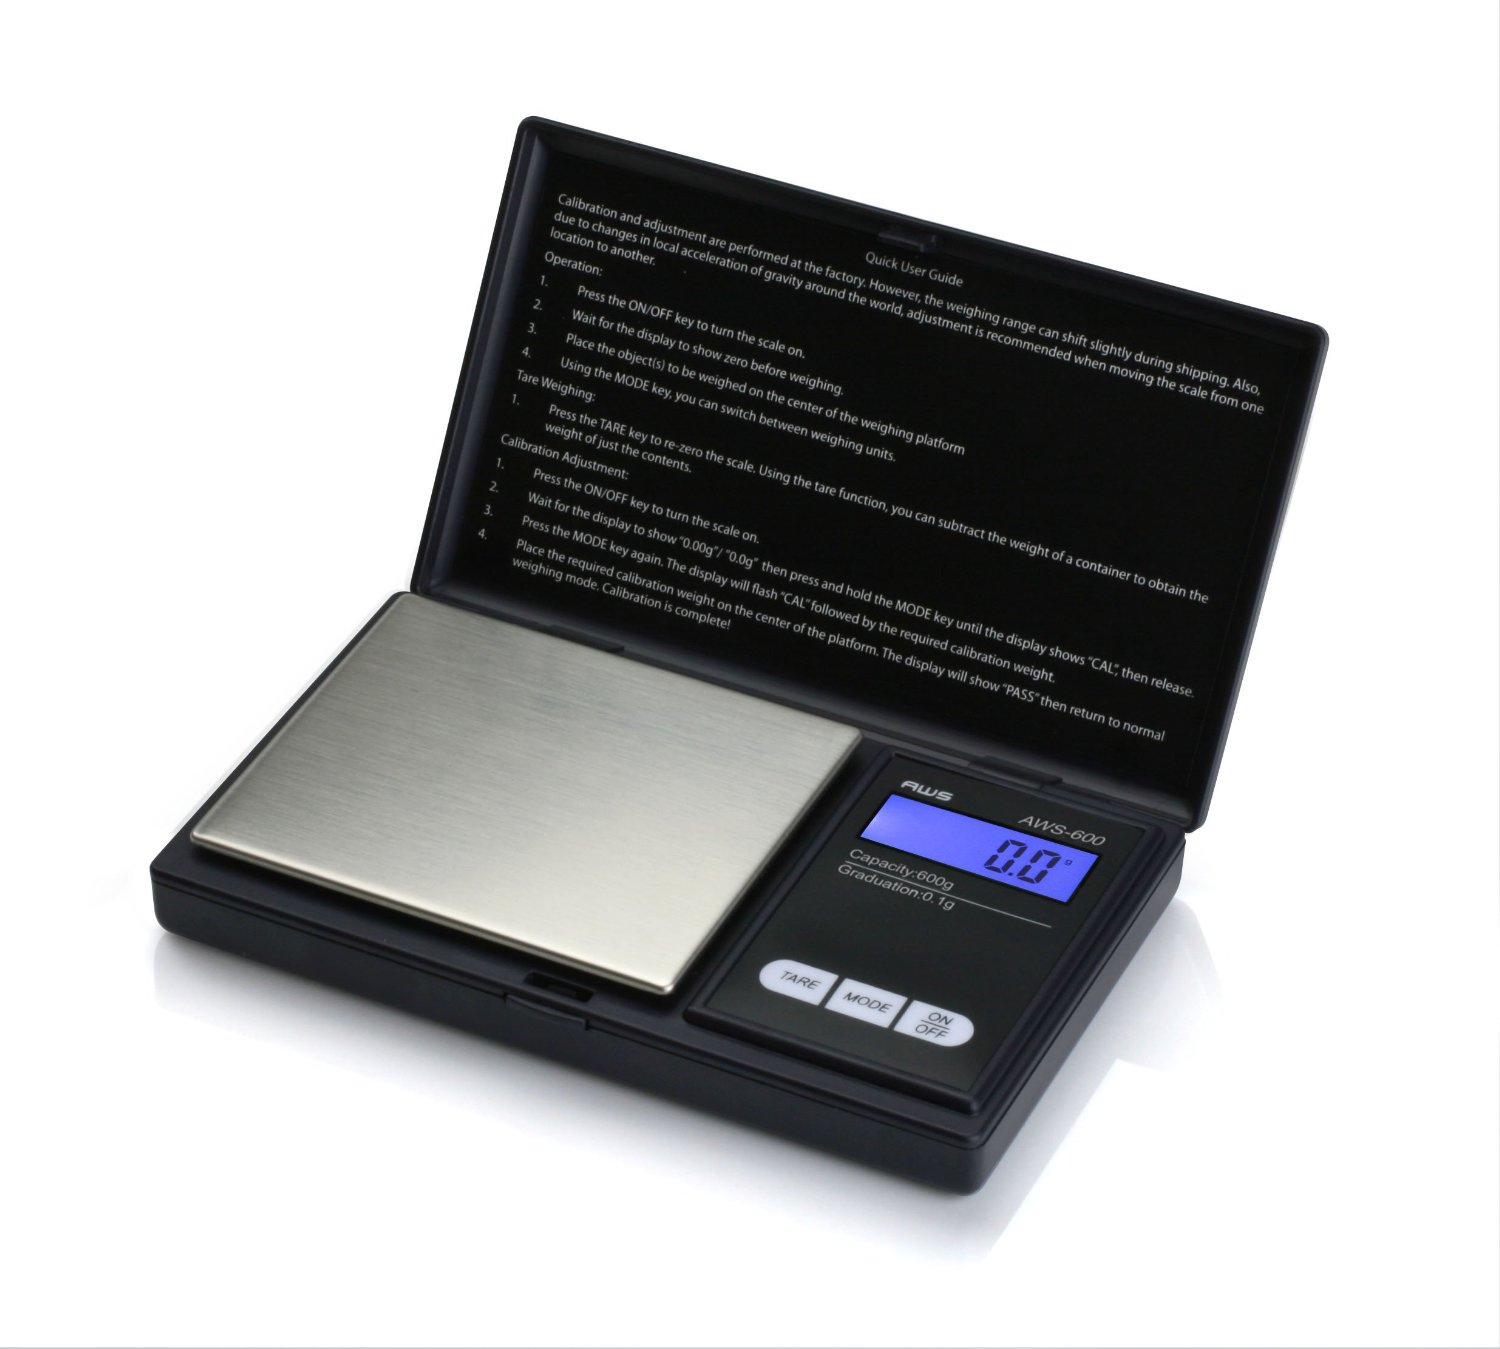 American Weigh Scales Digital Personal Nutrition Scale Only $7.86! (Reg. $39.99)